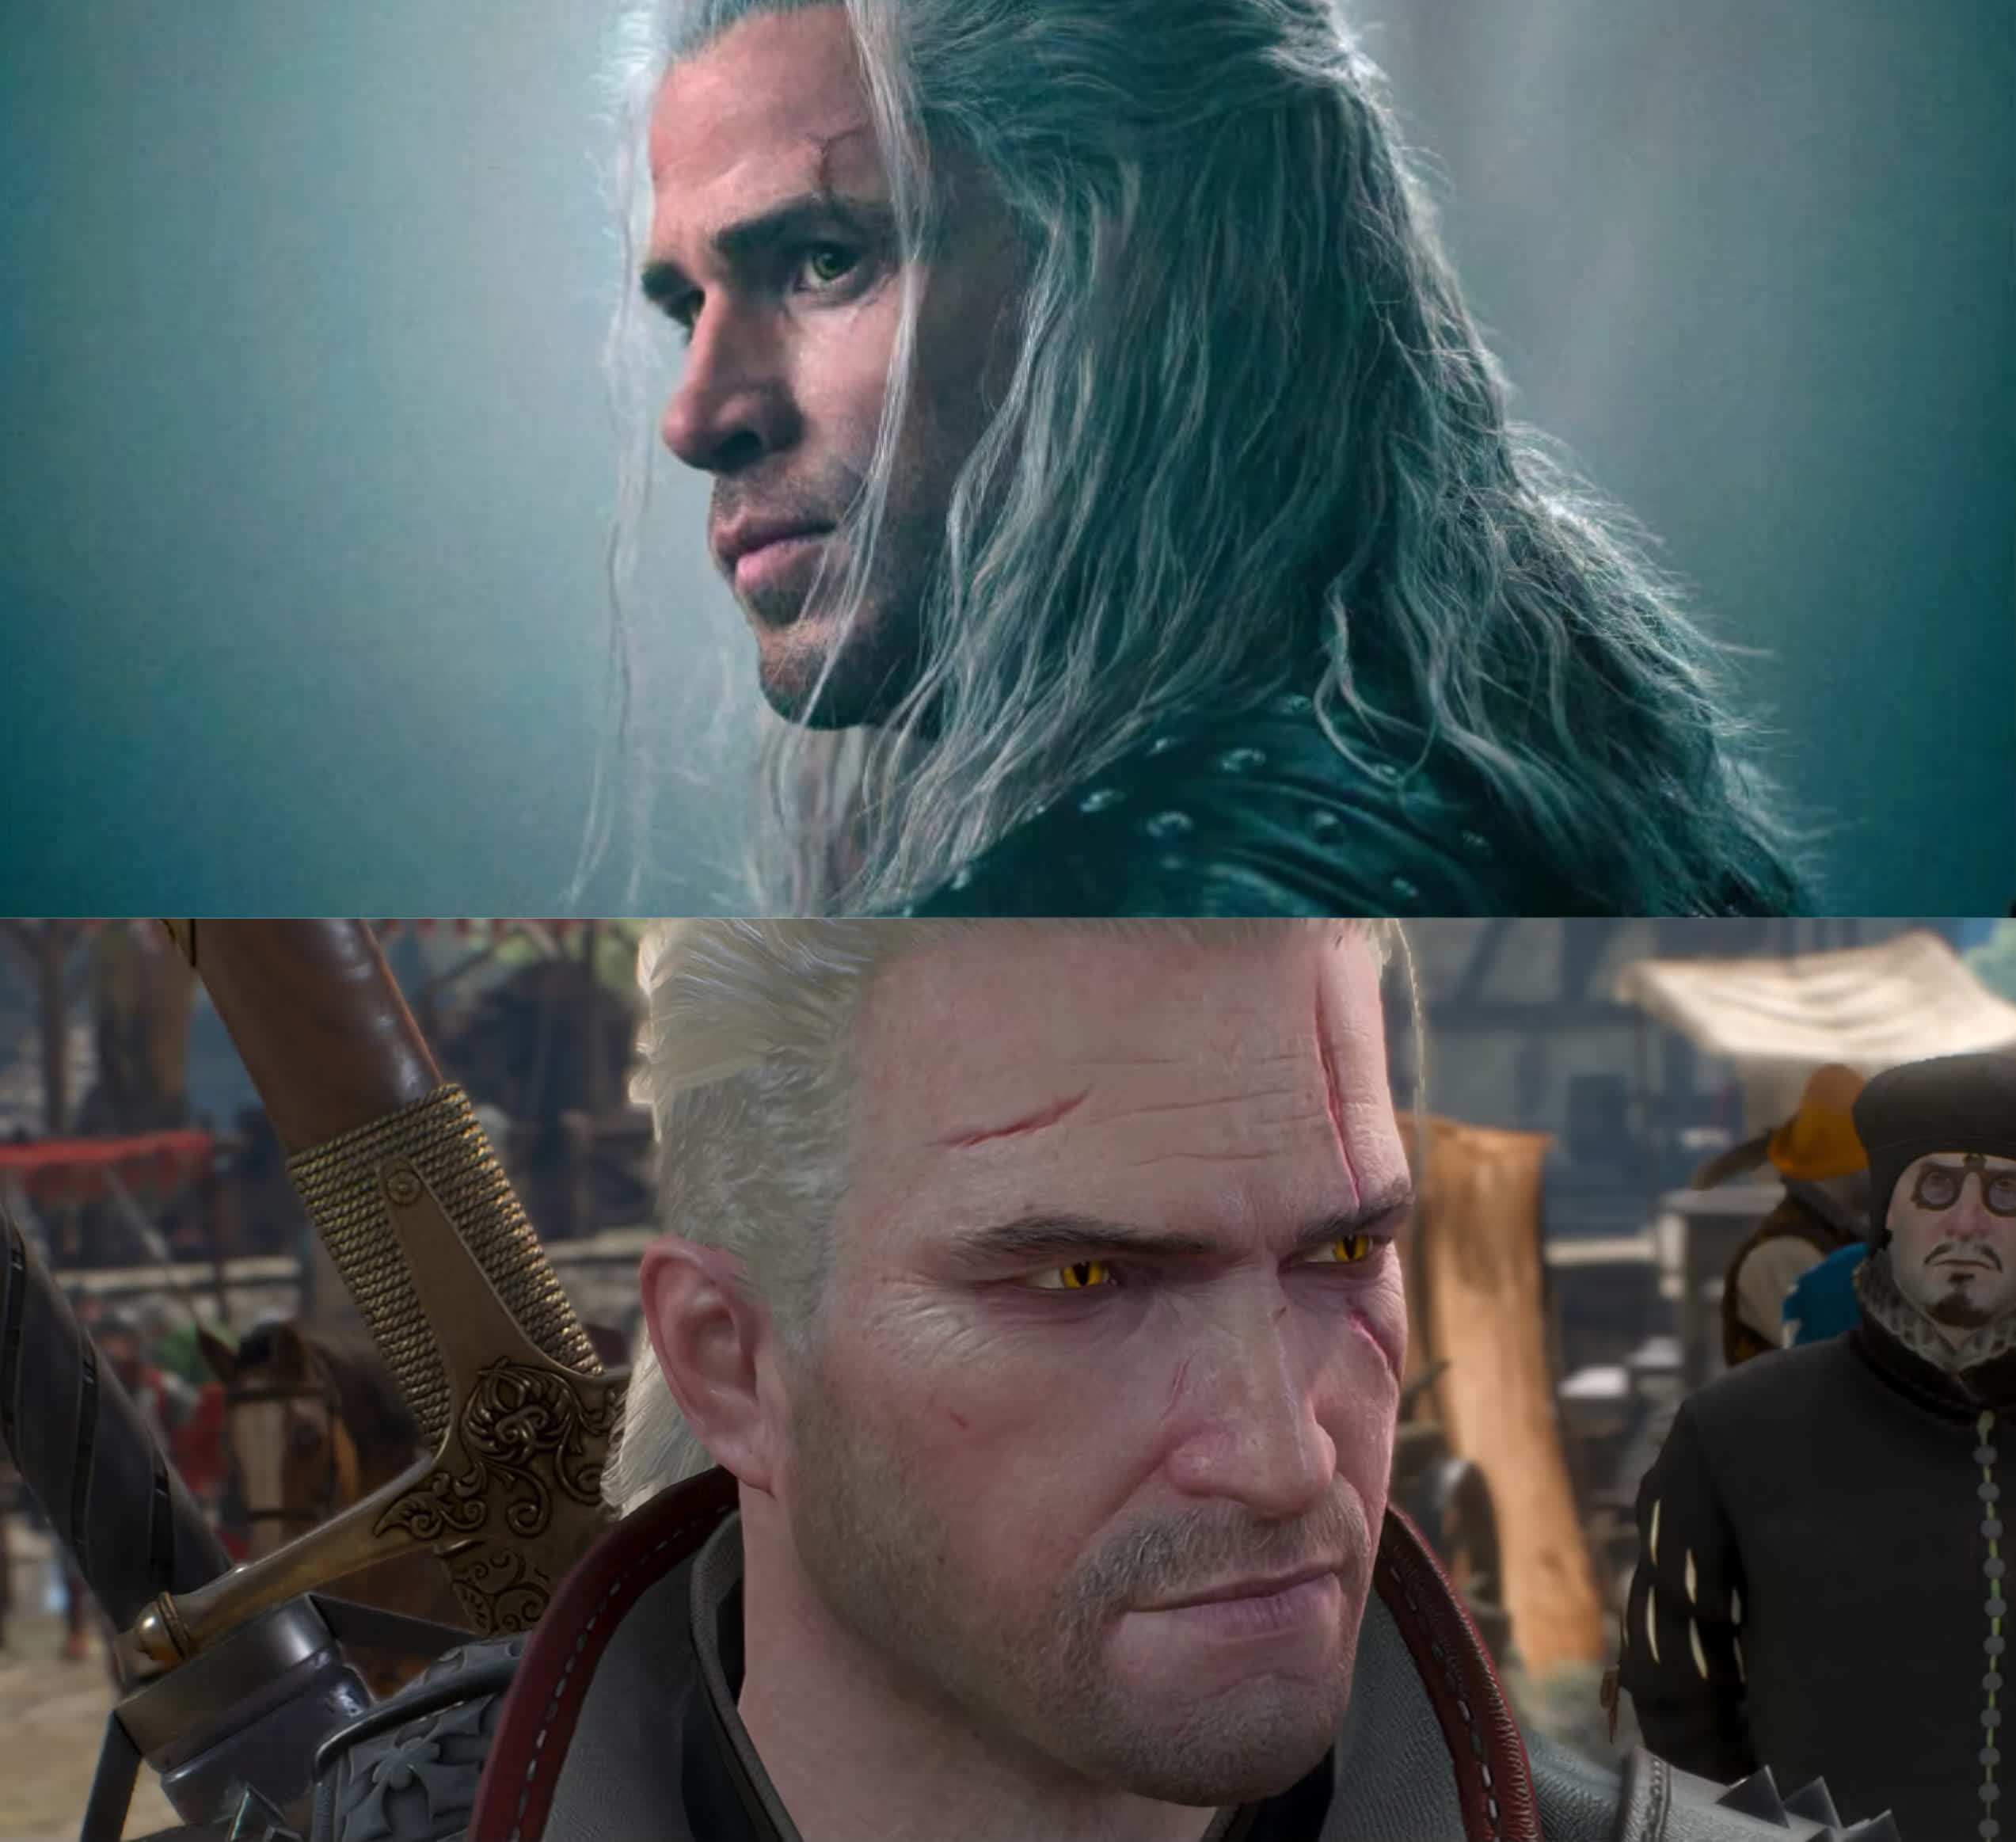 Netflix reveals first footage of Liam Hemsworth as the new Witcher following Henry Cavill's departure